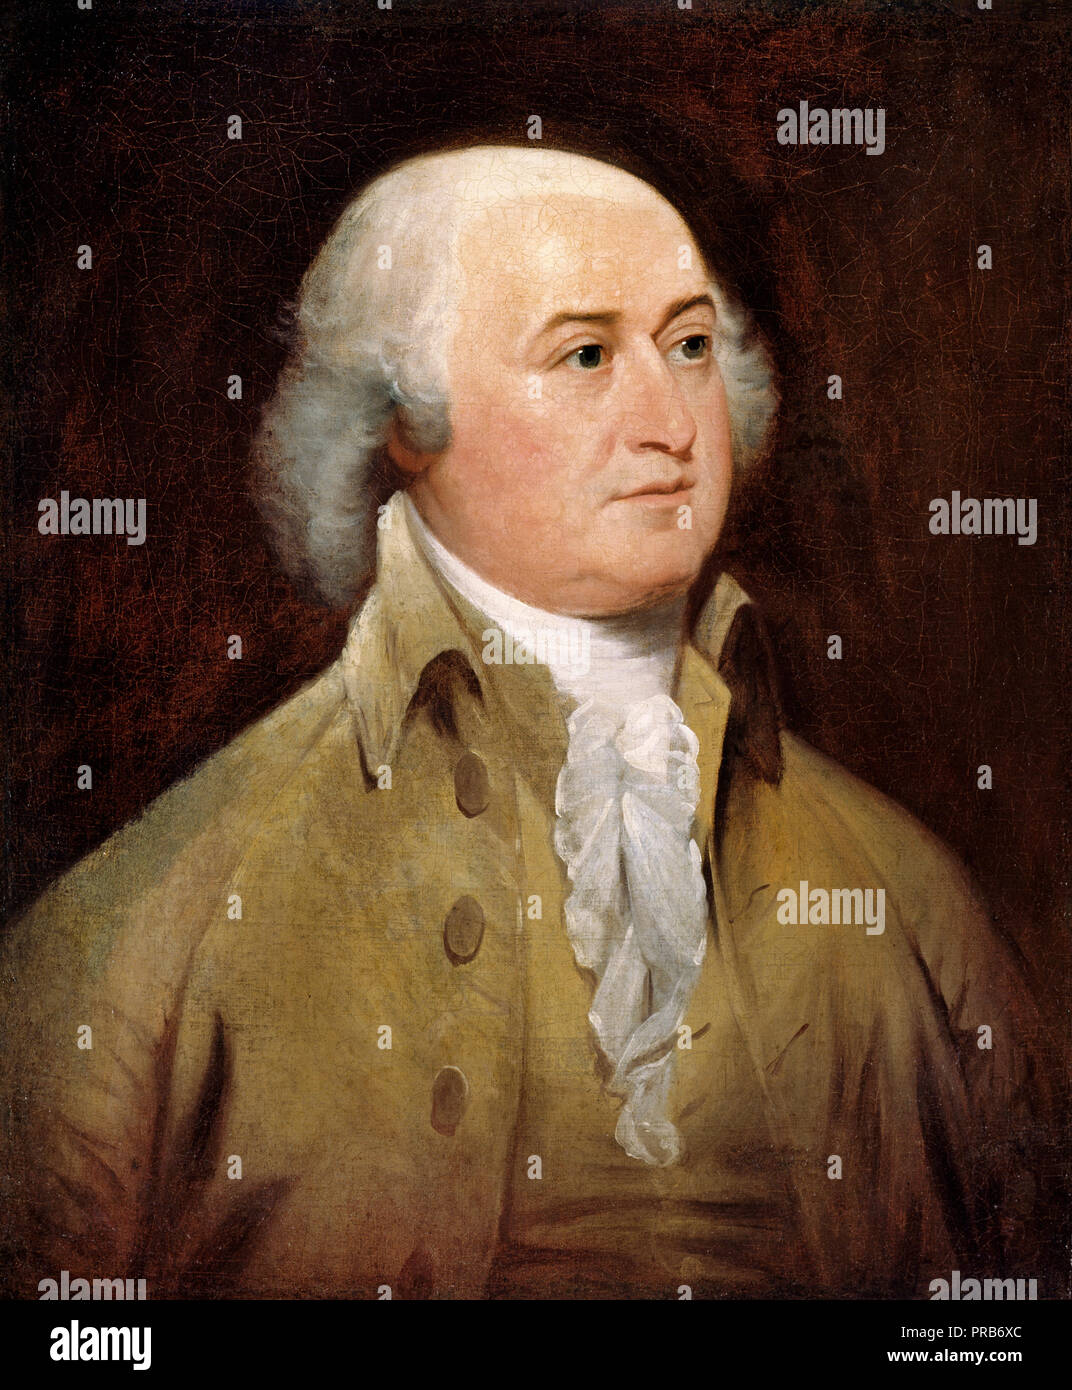 Head-and-Shoulders Portrait Second President of The United States of America John Adams Facing Slightly Right. Historic Photos 1814 Photo John Adams